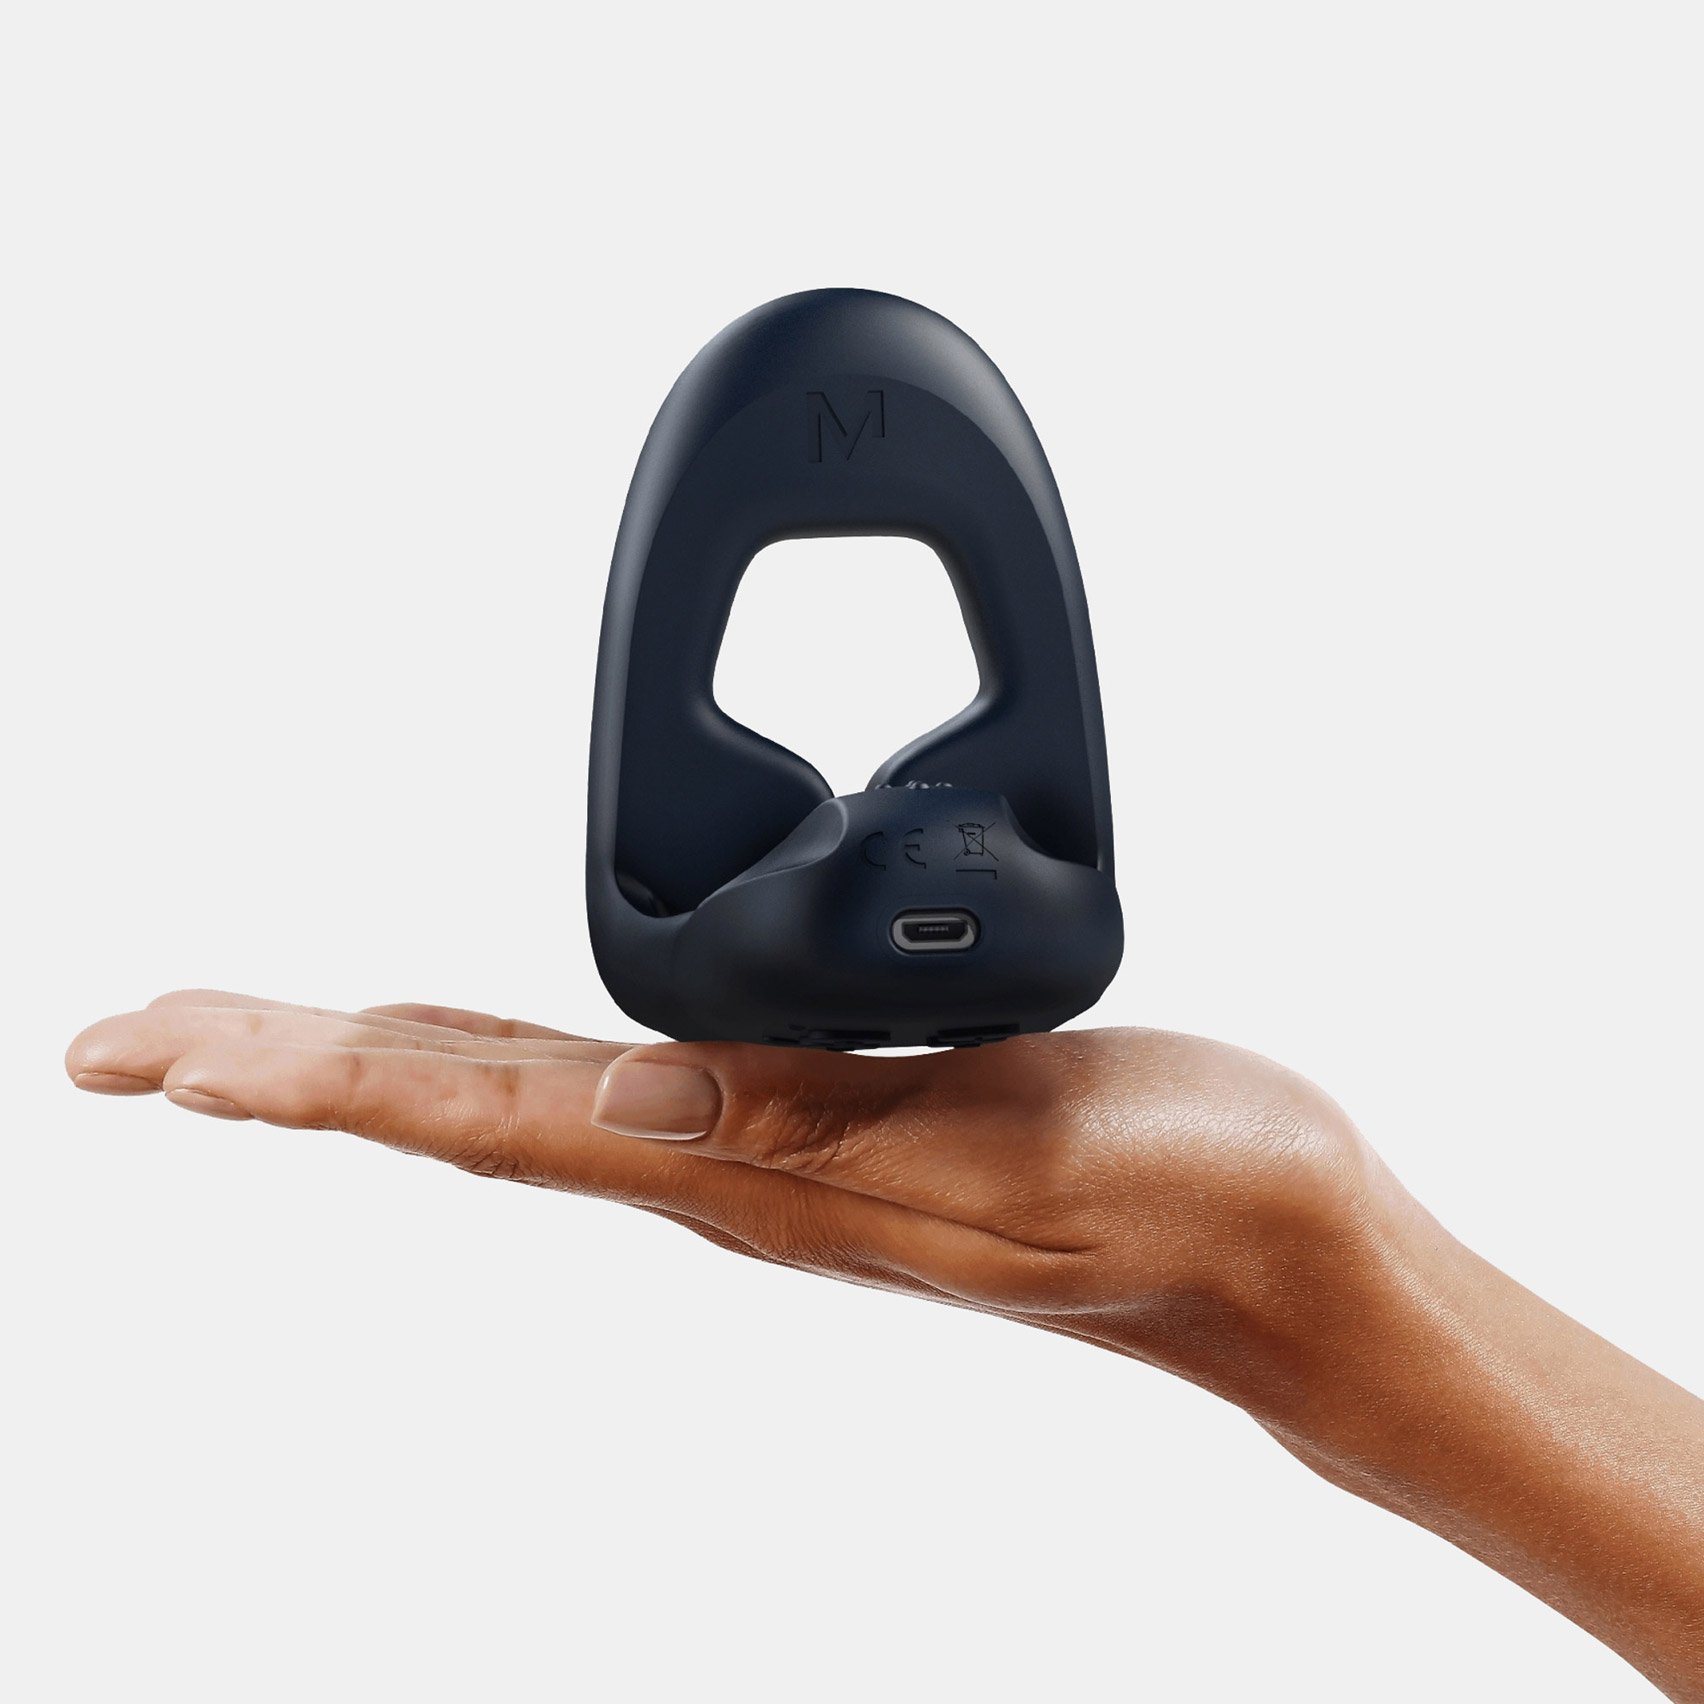 Tenuto 2 is a wearable vibrator designed to tackle erectile dysfunction photo